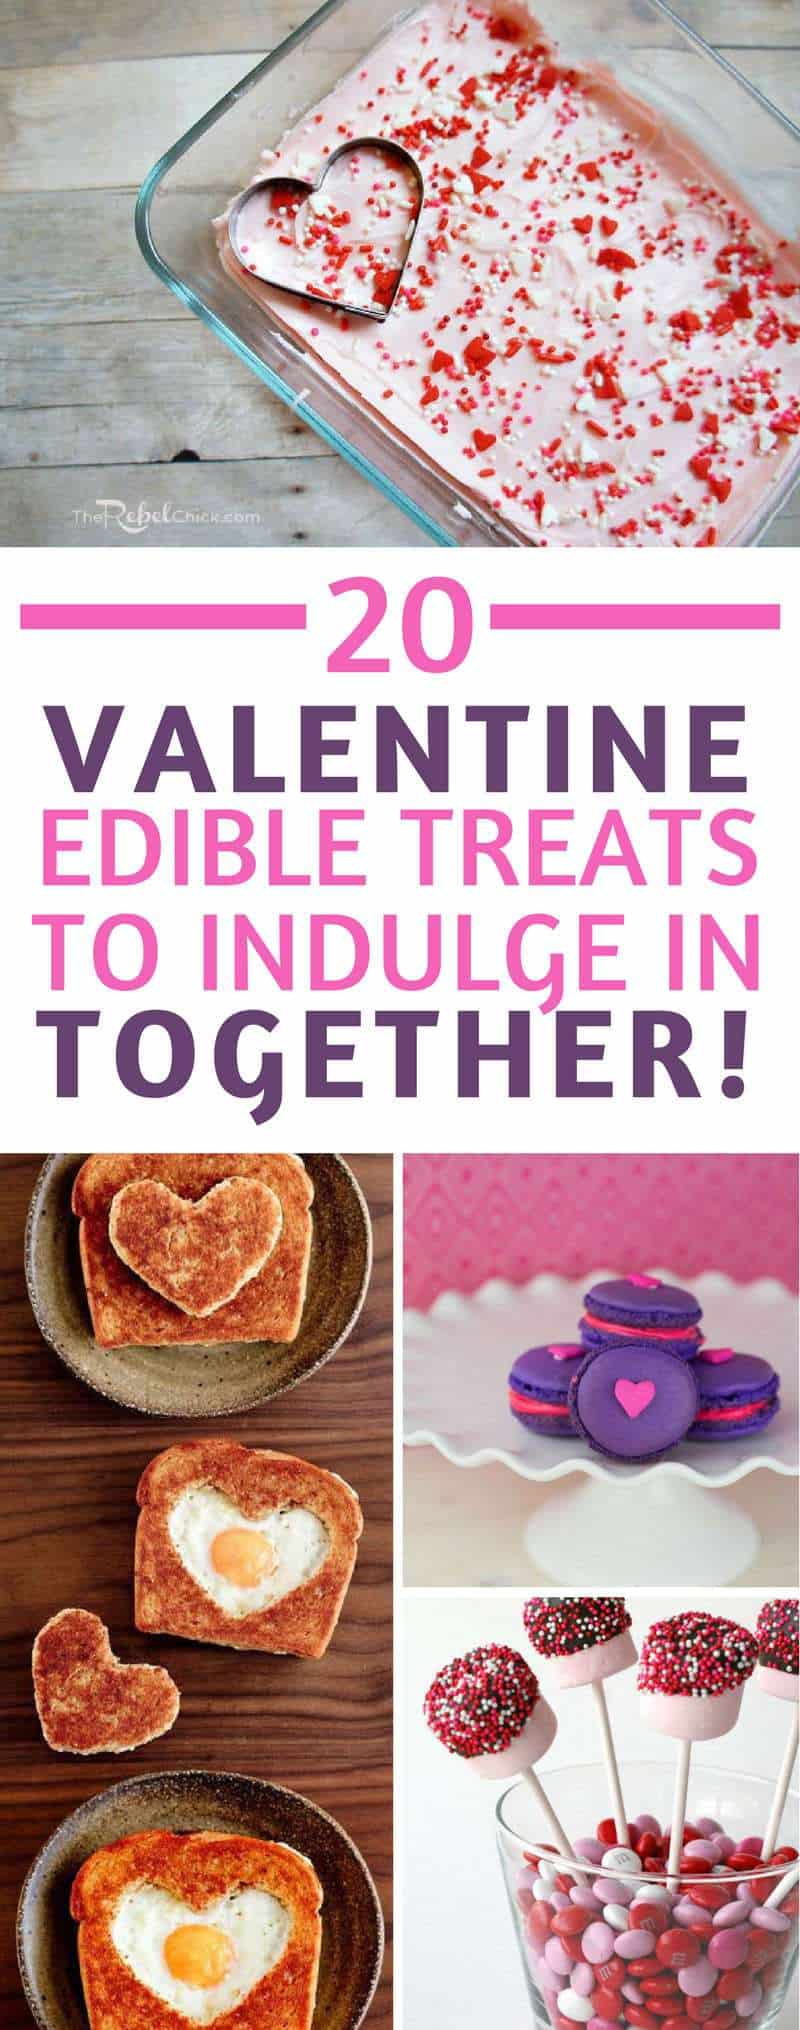 Edible Treats for Valentine's Day - Whether you're looking for a sweet edible gift for a loved one or just some yummy treats to make and enjoy with the kids on February 14 there is something in this collection for everyone! Happy #valentinesday 